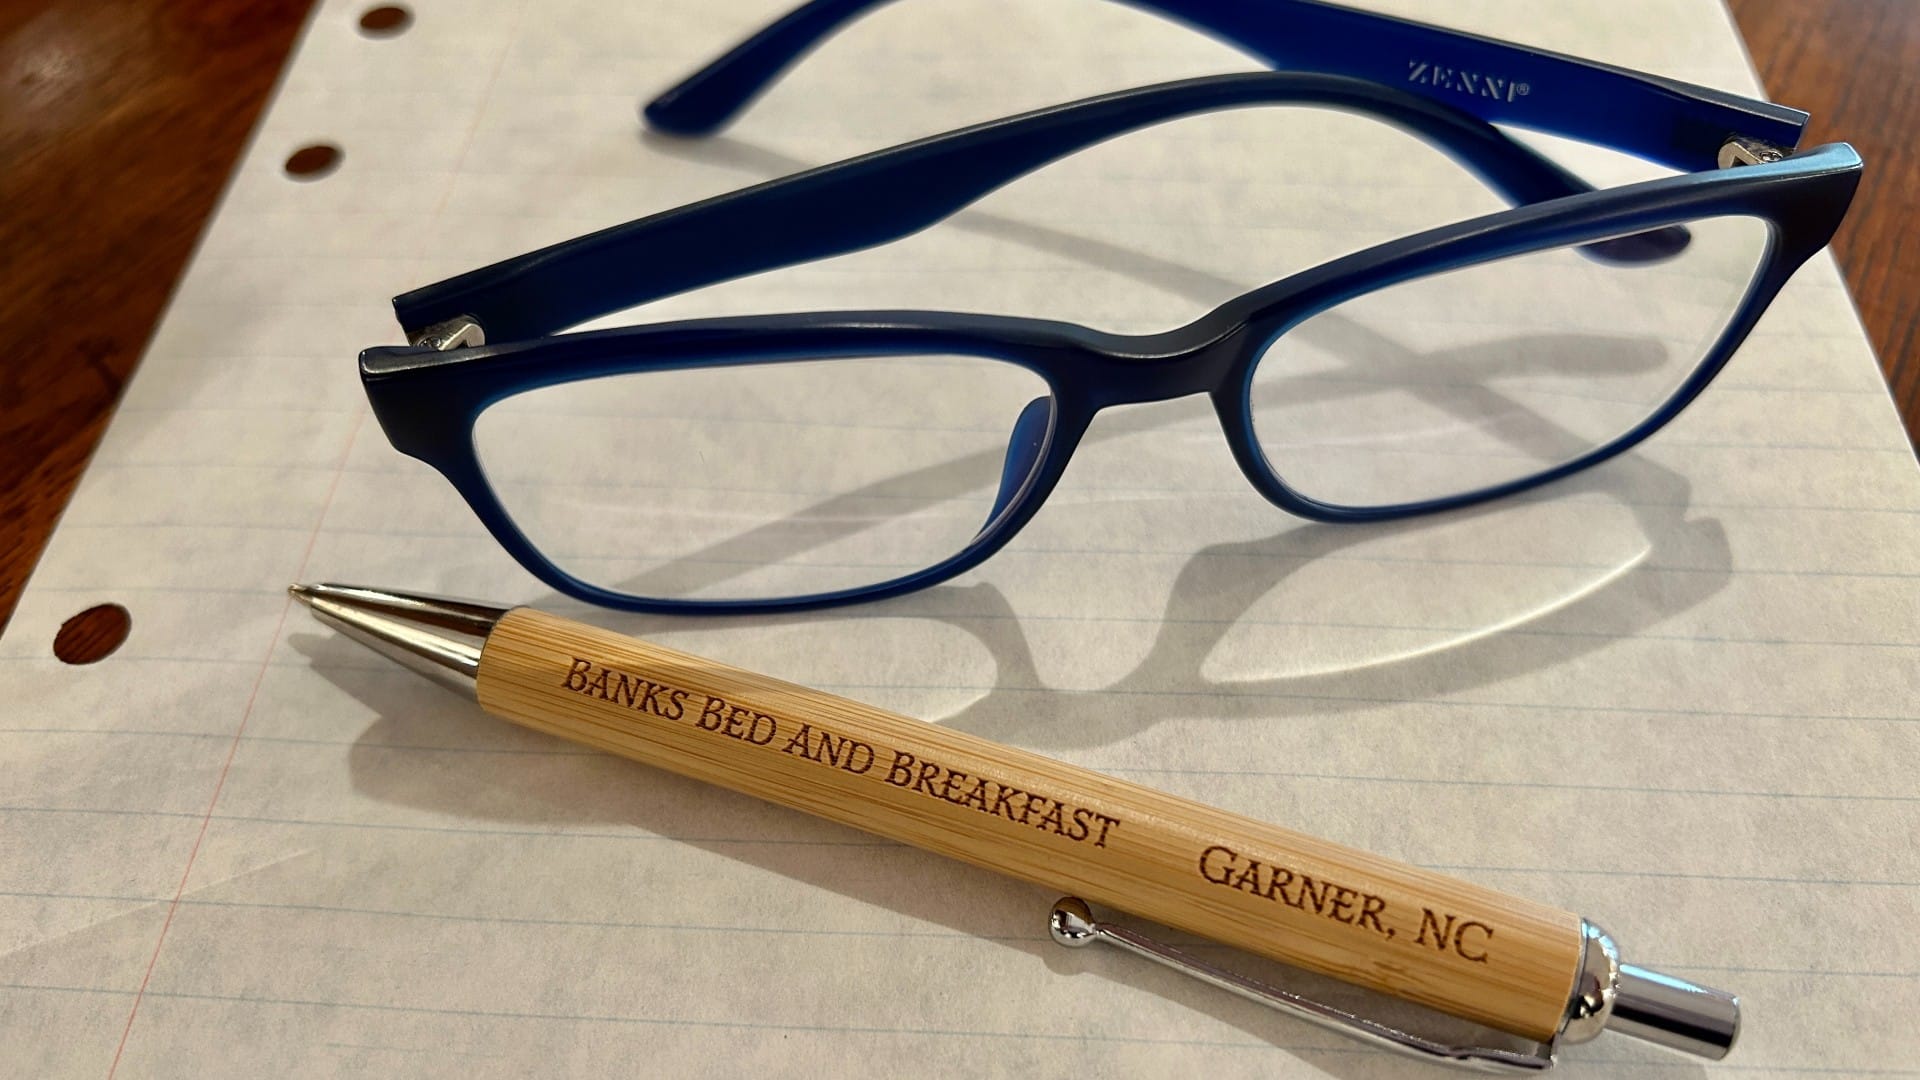 A pair of reading glasses next to a pen on an empty lined piece of paper